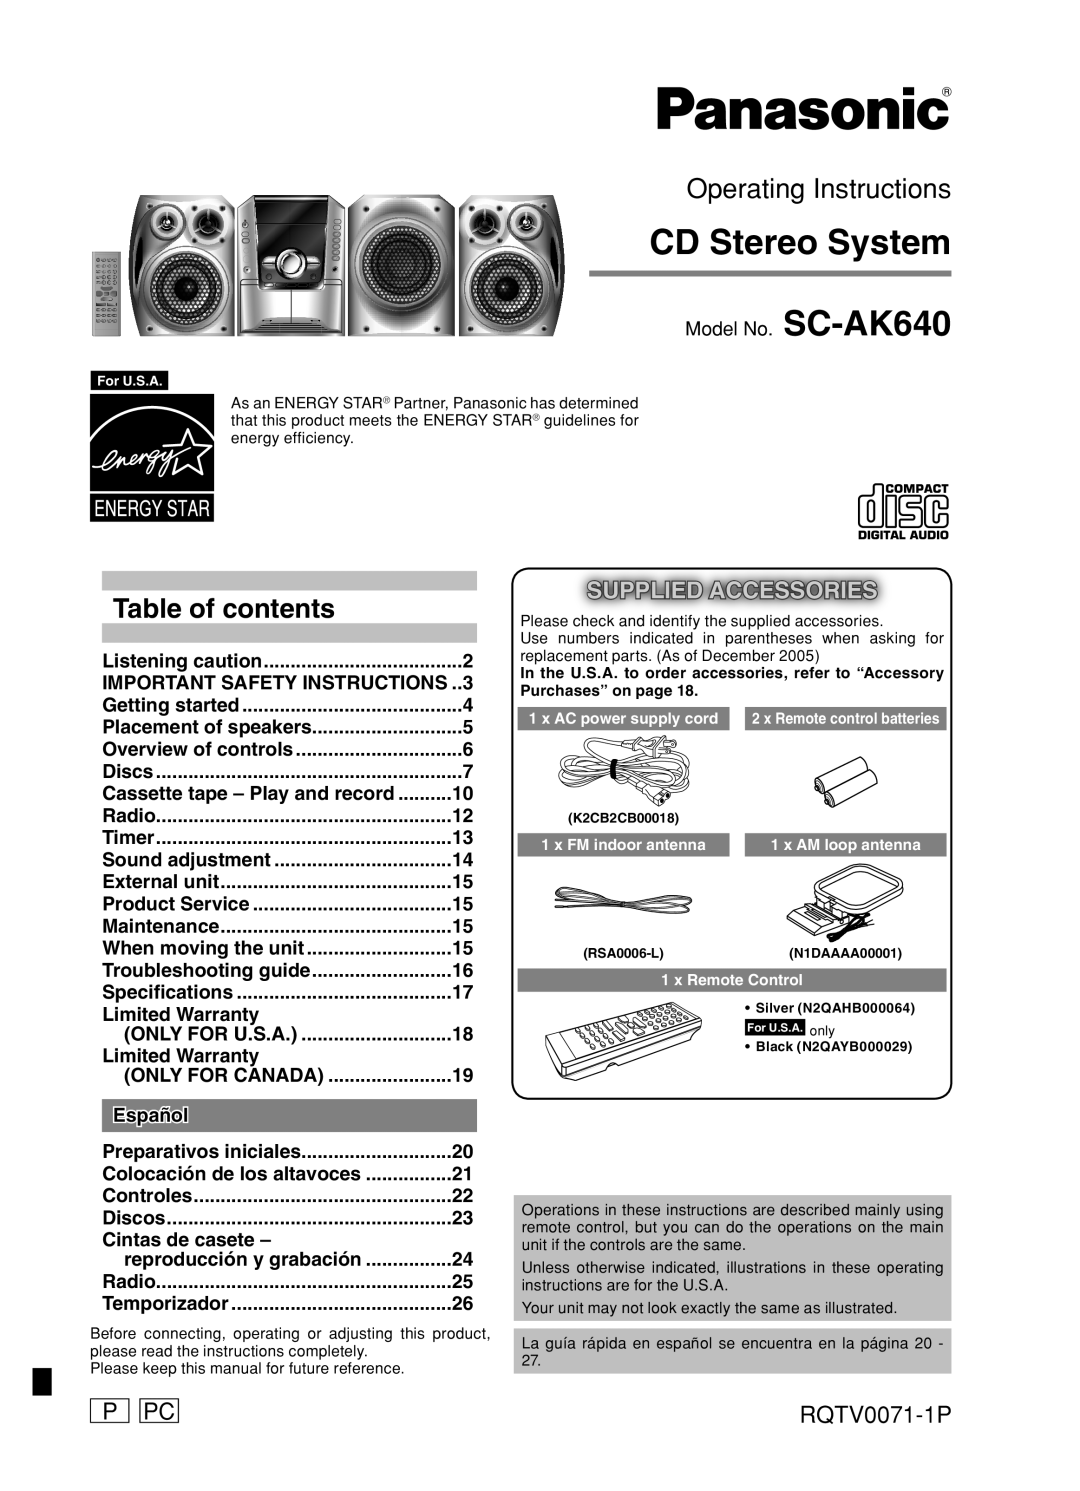 Panasonic SC-AK640 important safety instructions P Pc, RQTV0071-1P, CD Stereo System, Operating Instructions 